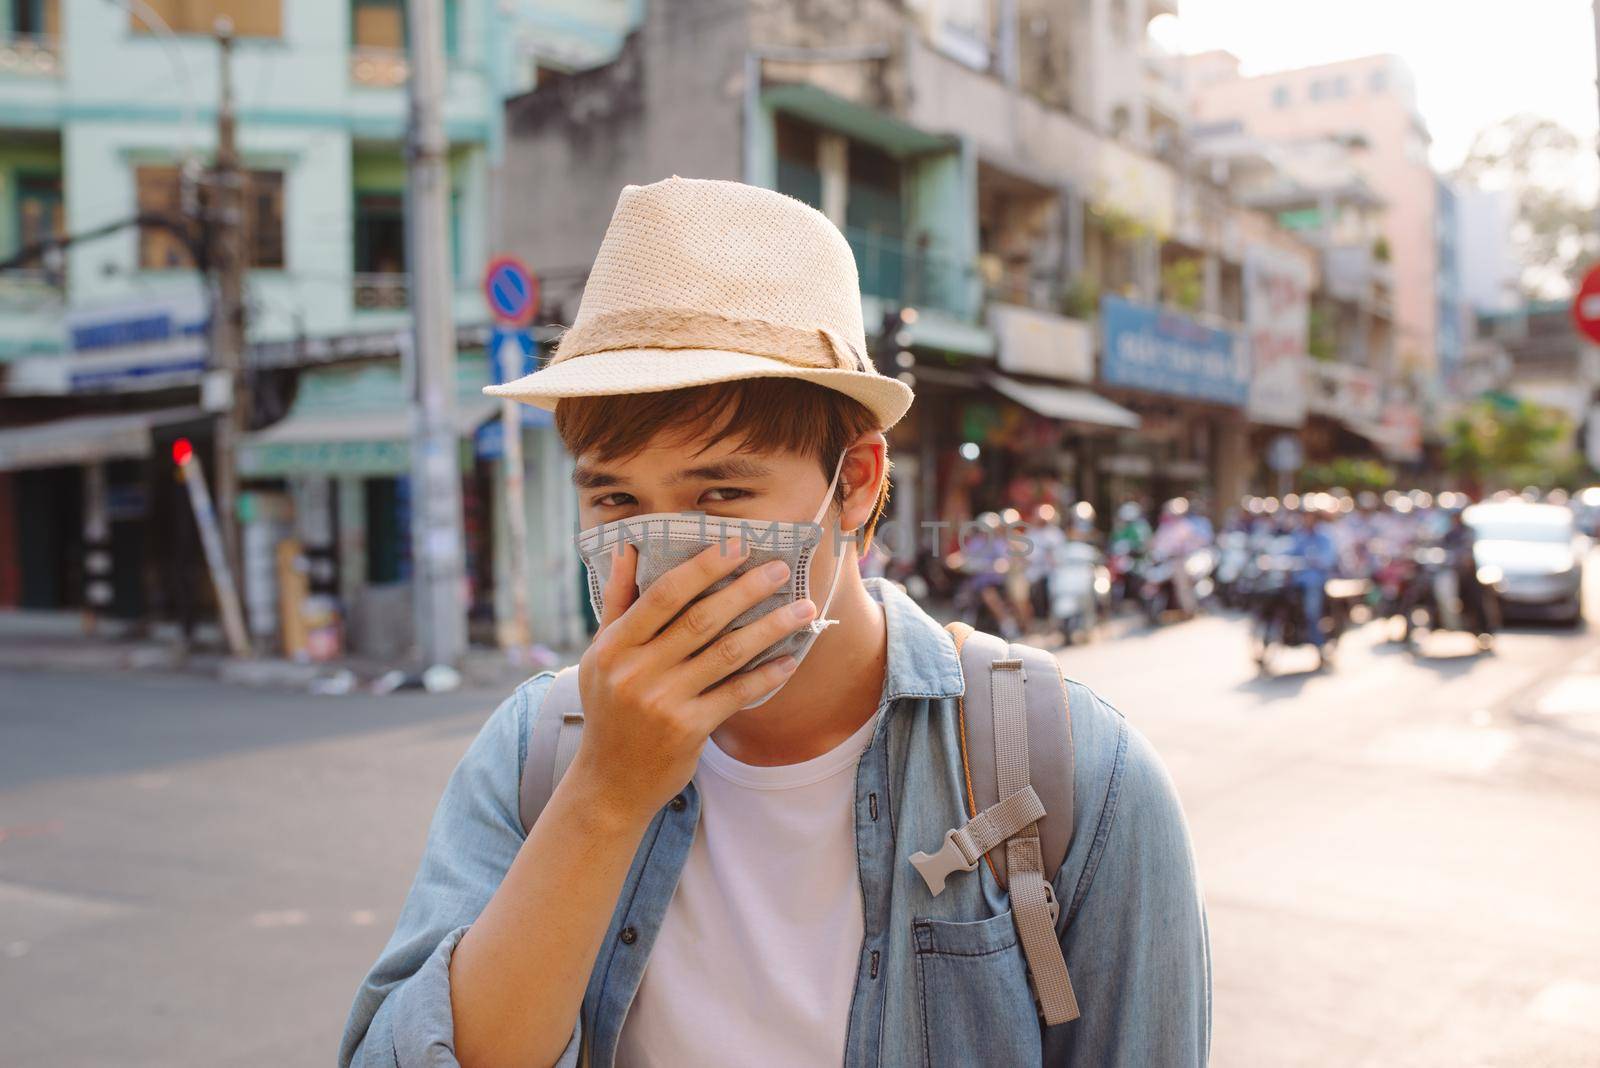 Vietnamese wearing face masks due to the pollution situation in Ho Chi Minh city